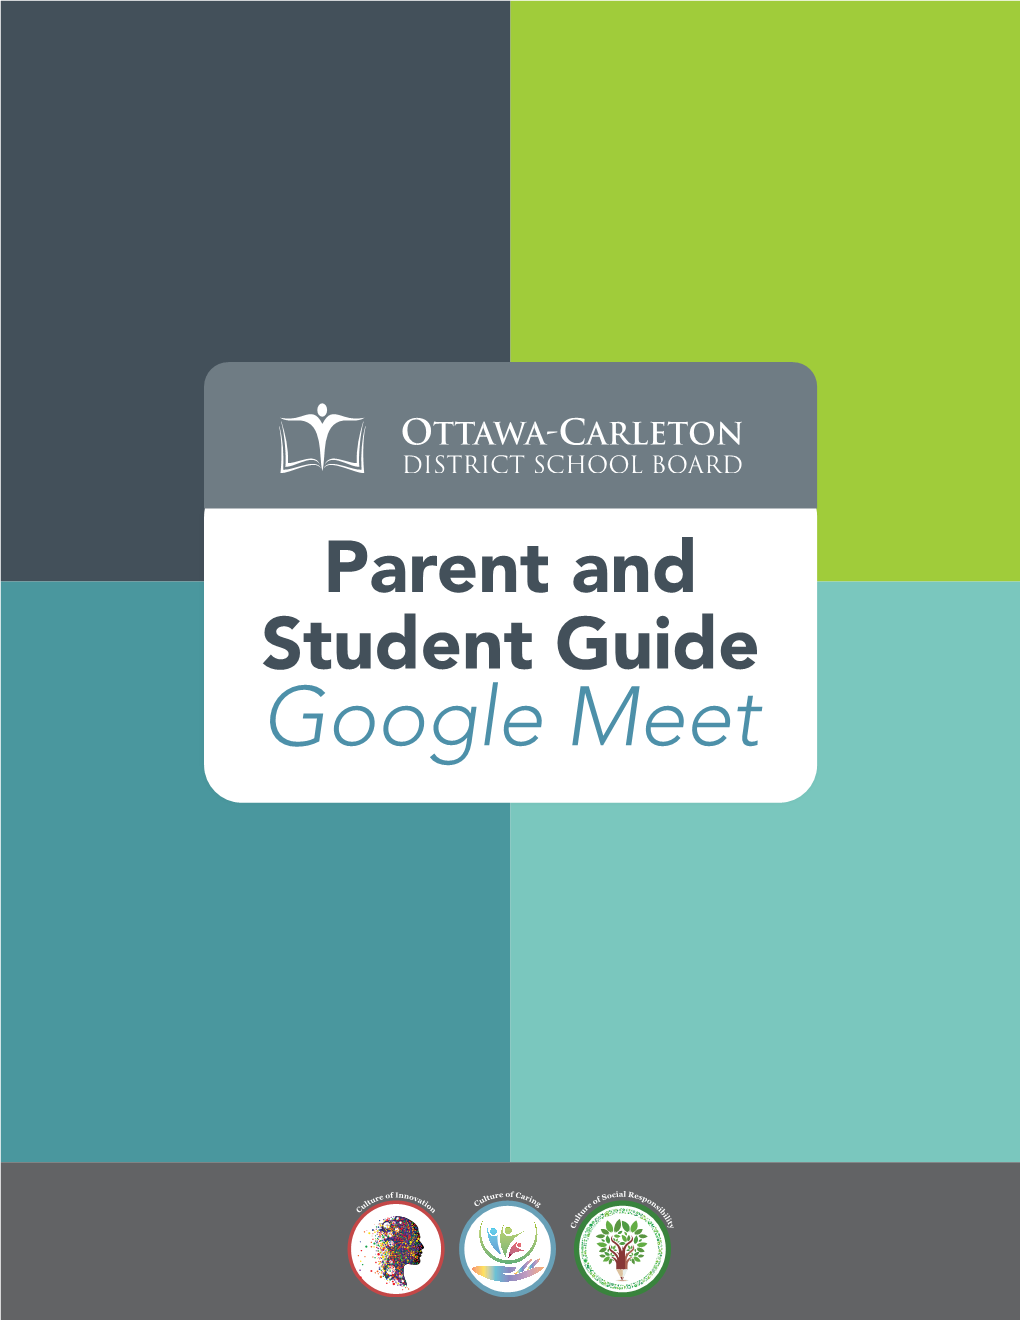 PARENT and STUDENT GUIDE to GOOGLE MEET Click Here for a Youtube Presentation for Parents and Students Using Google Meet Opening a Shared Google Meet